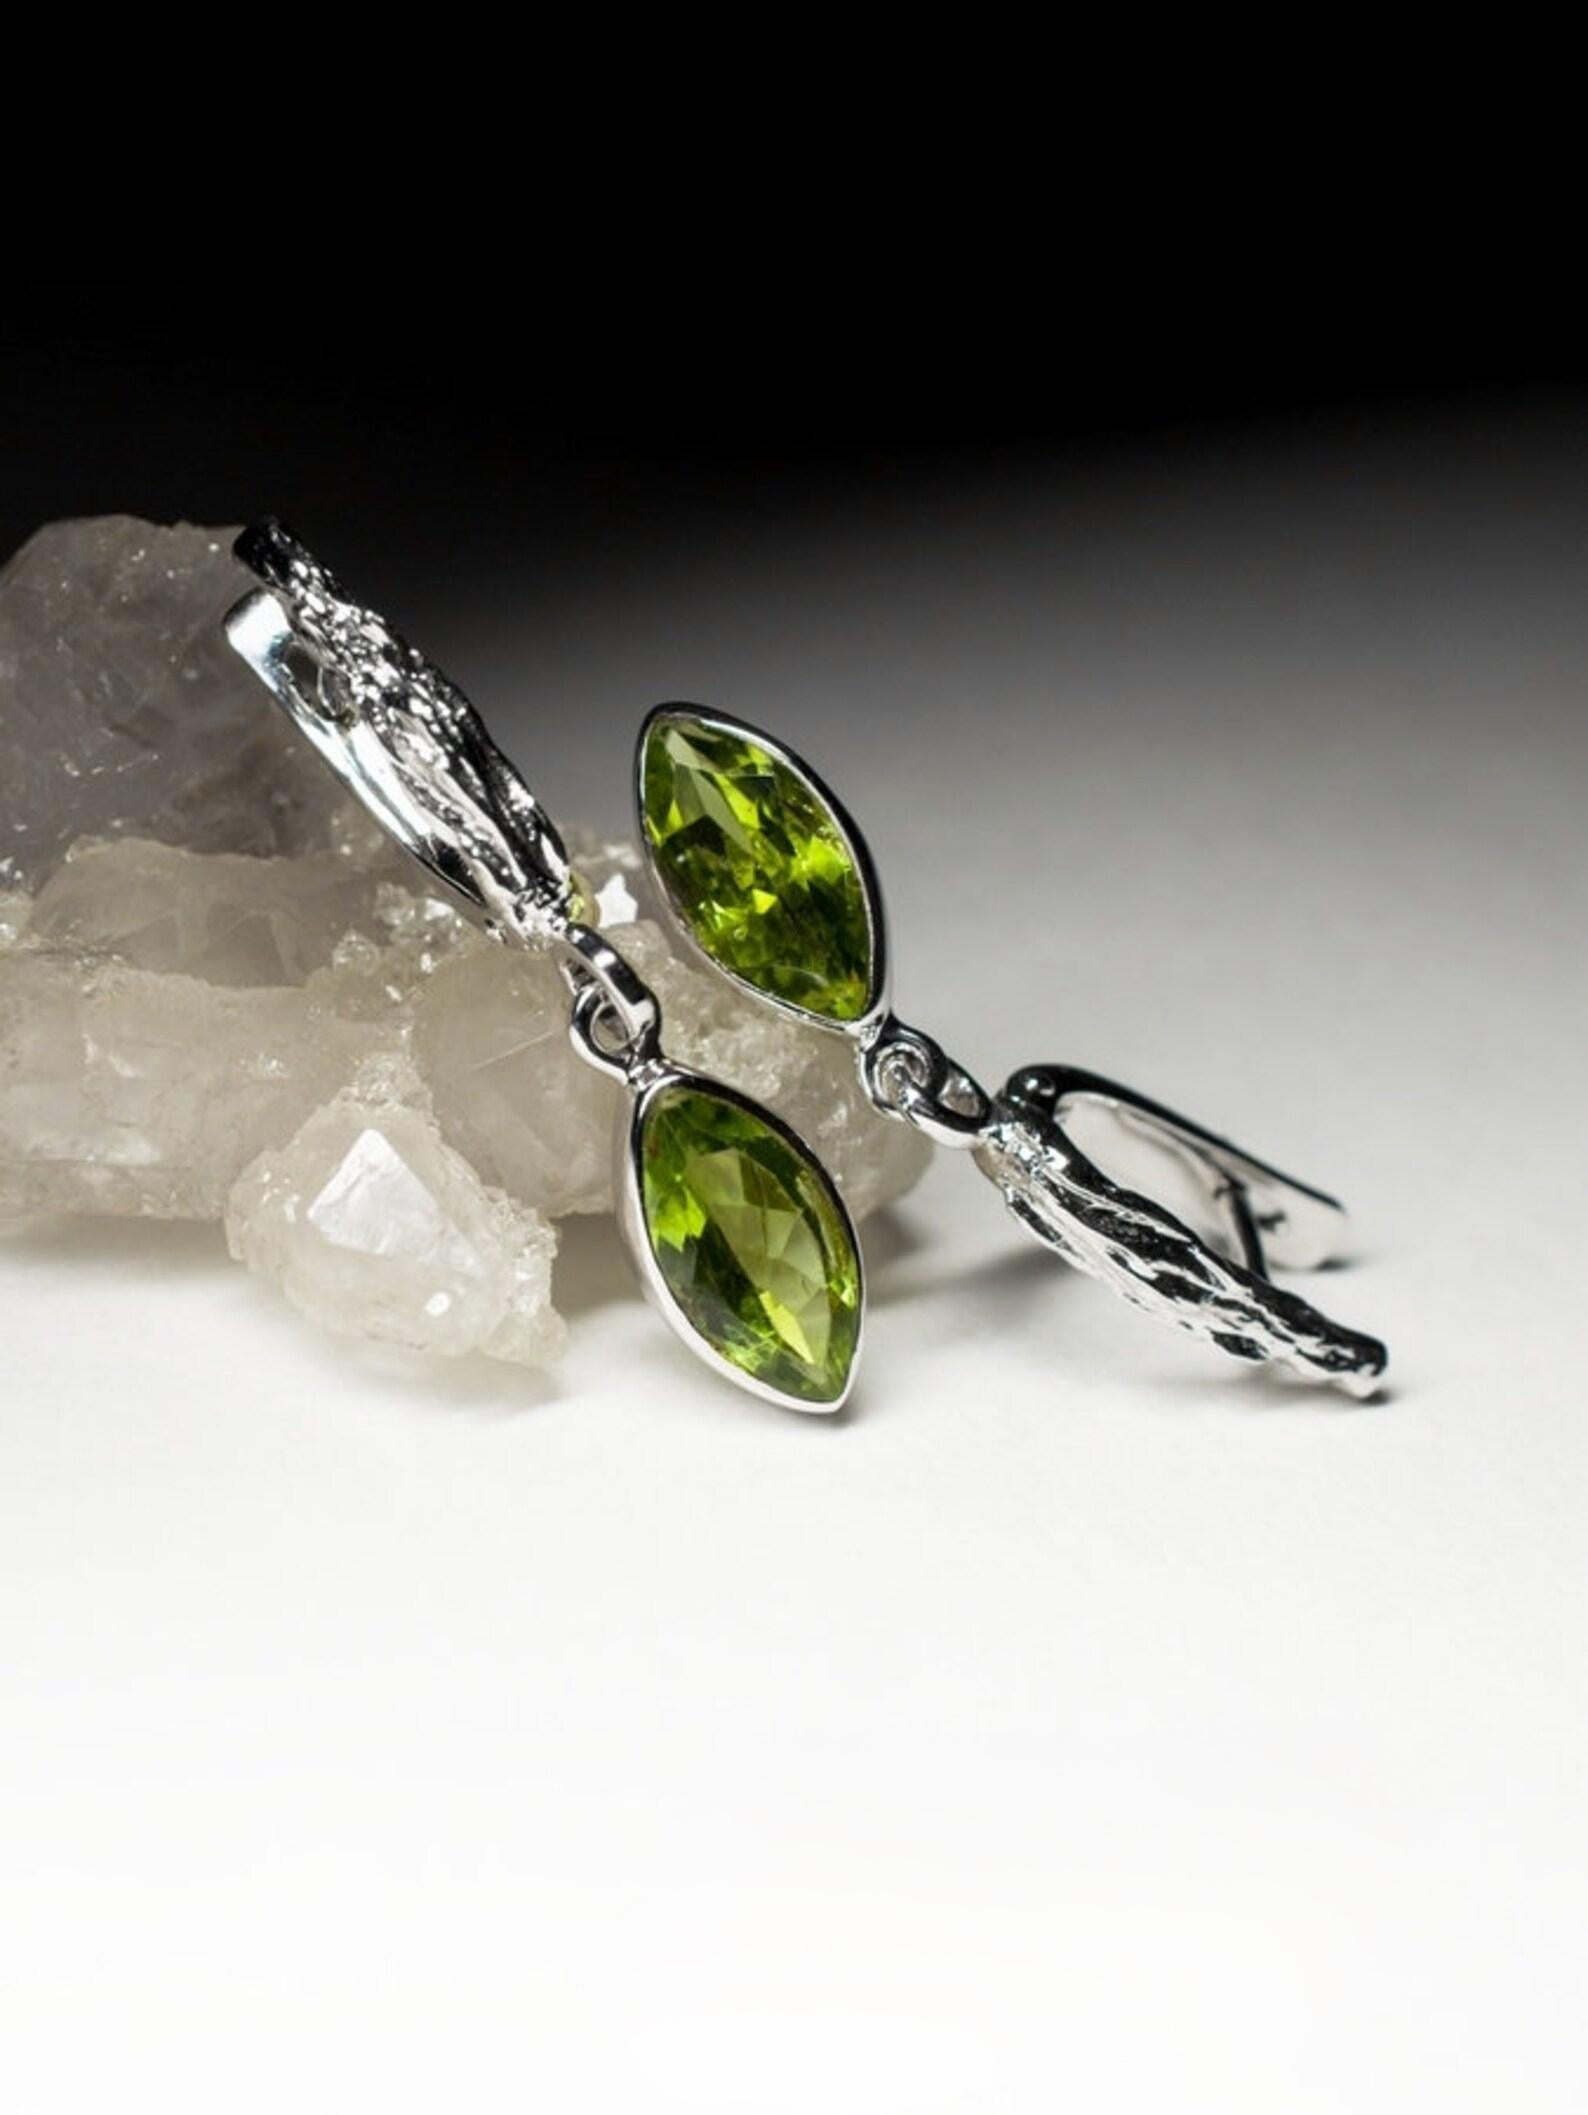 Women's or Men's Chrysolite Silver Earrings Marquise Peridot Olive Green Leaf Gemstone For Sale